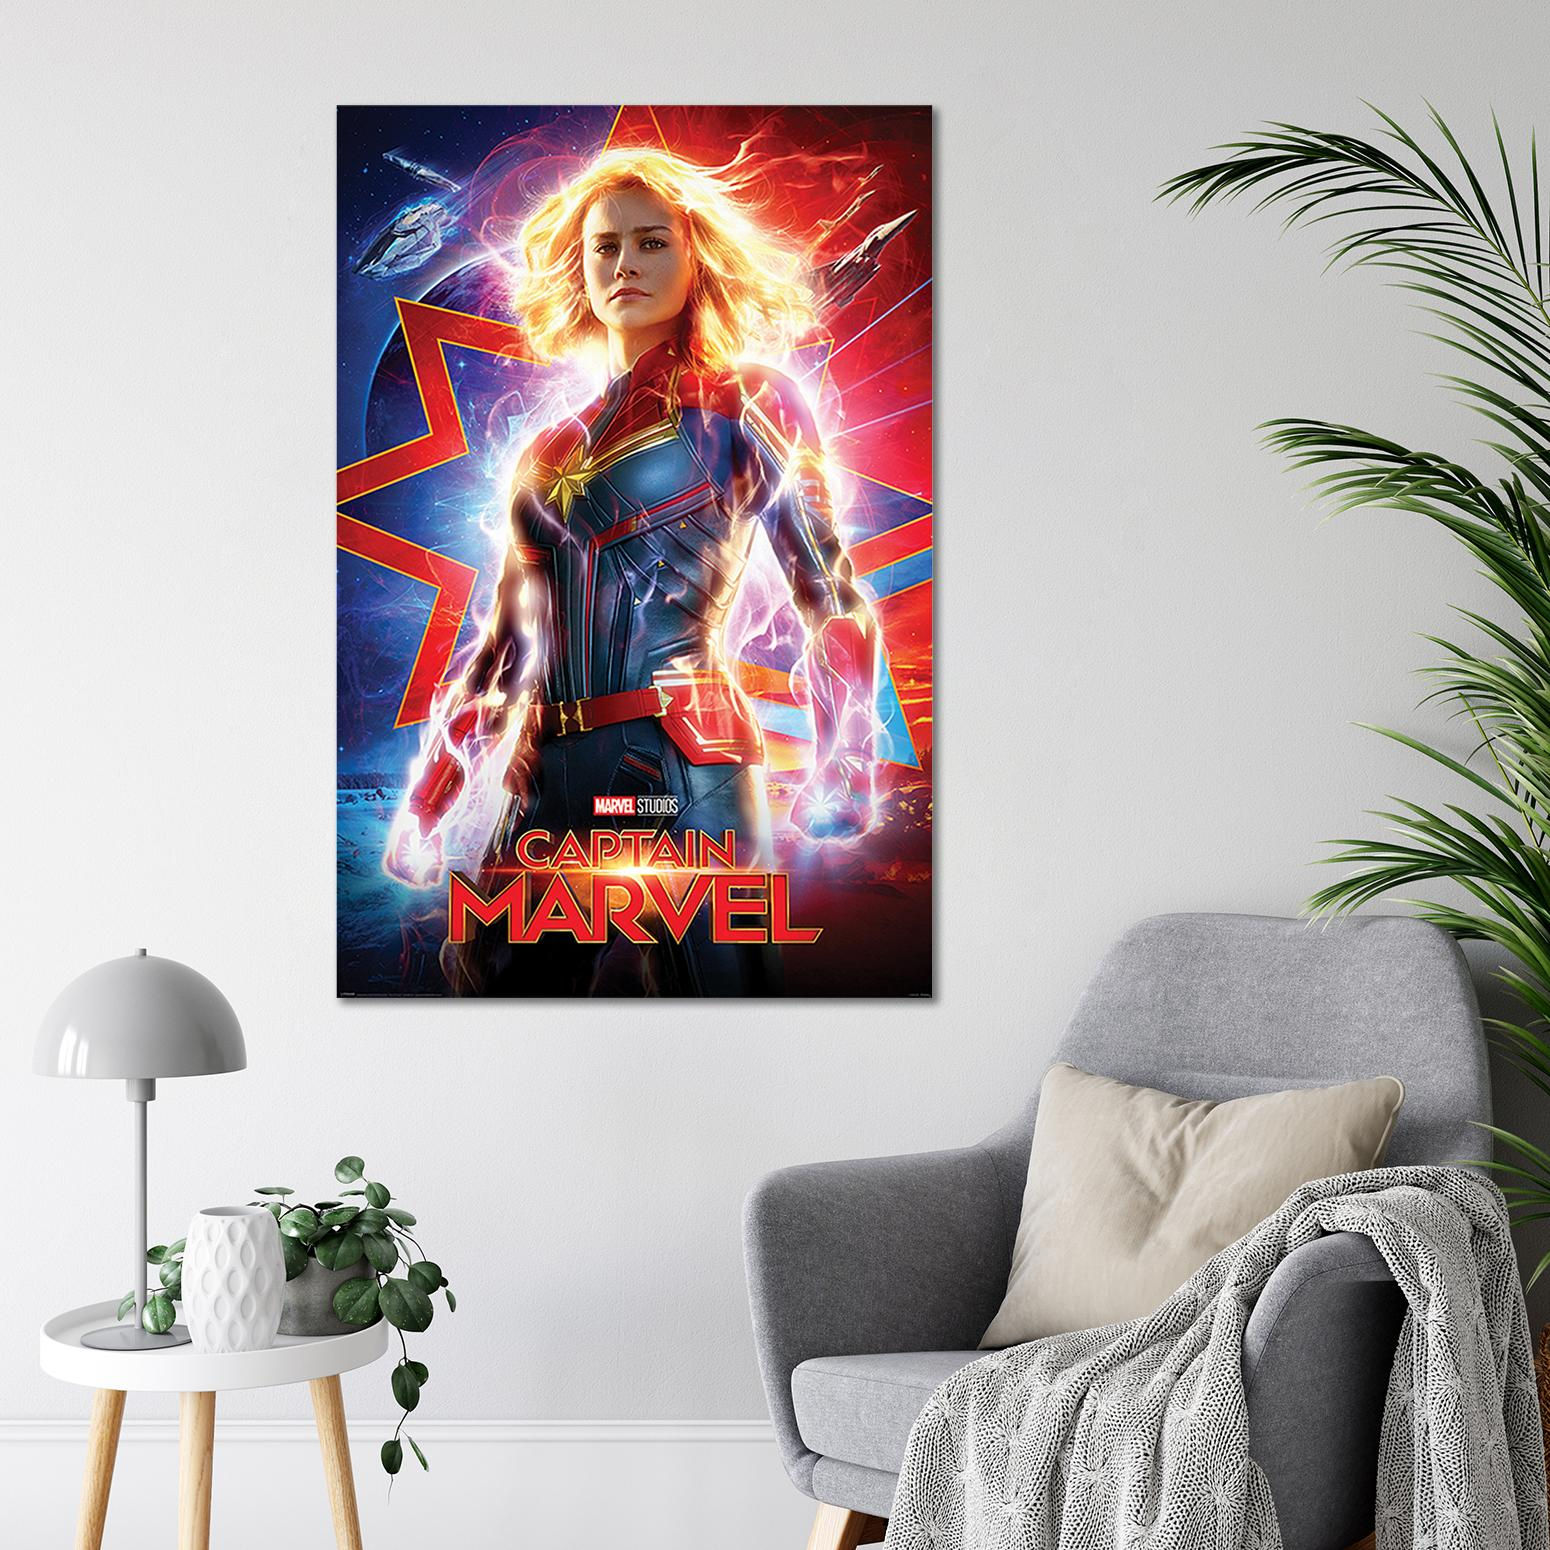 INTERNATIONAL Higher, Captain Marvel PYRAMID Further, Faster Poster